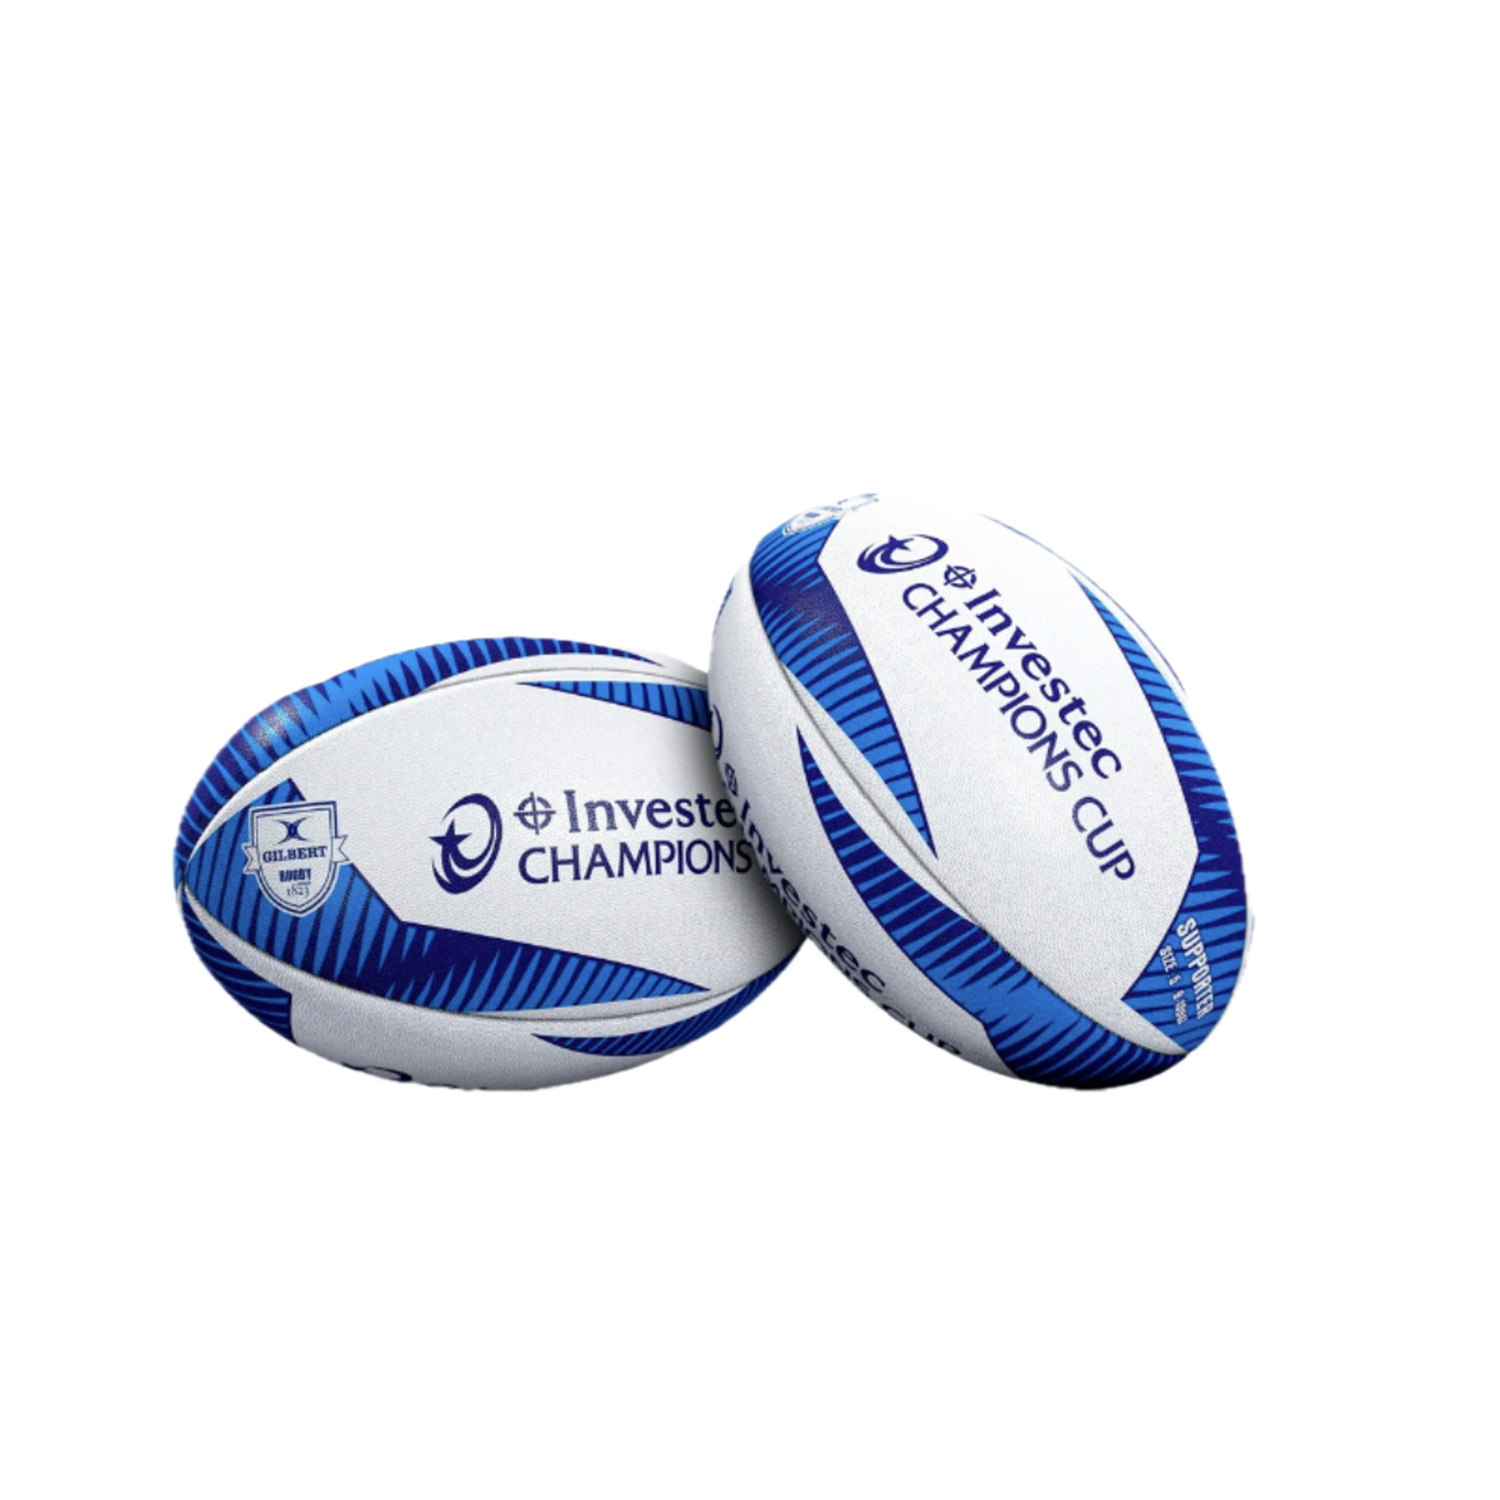 Investec Champions Cup Supporter Ball Size 5